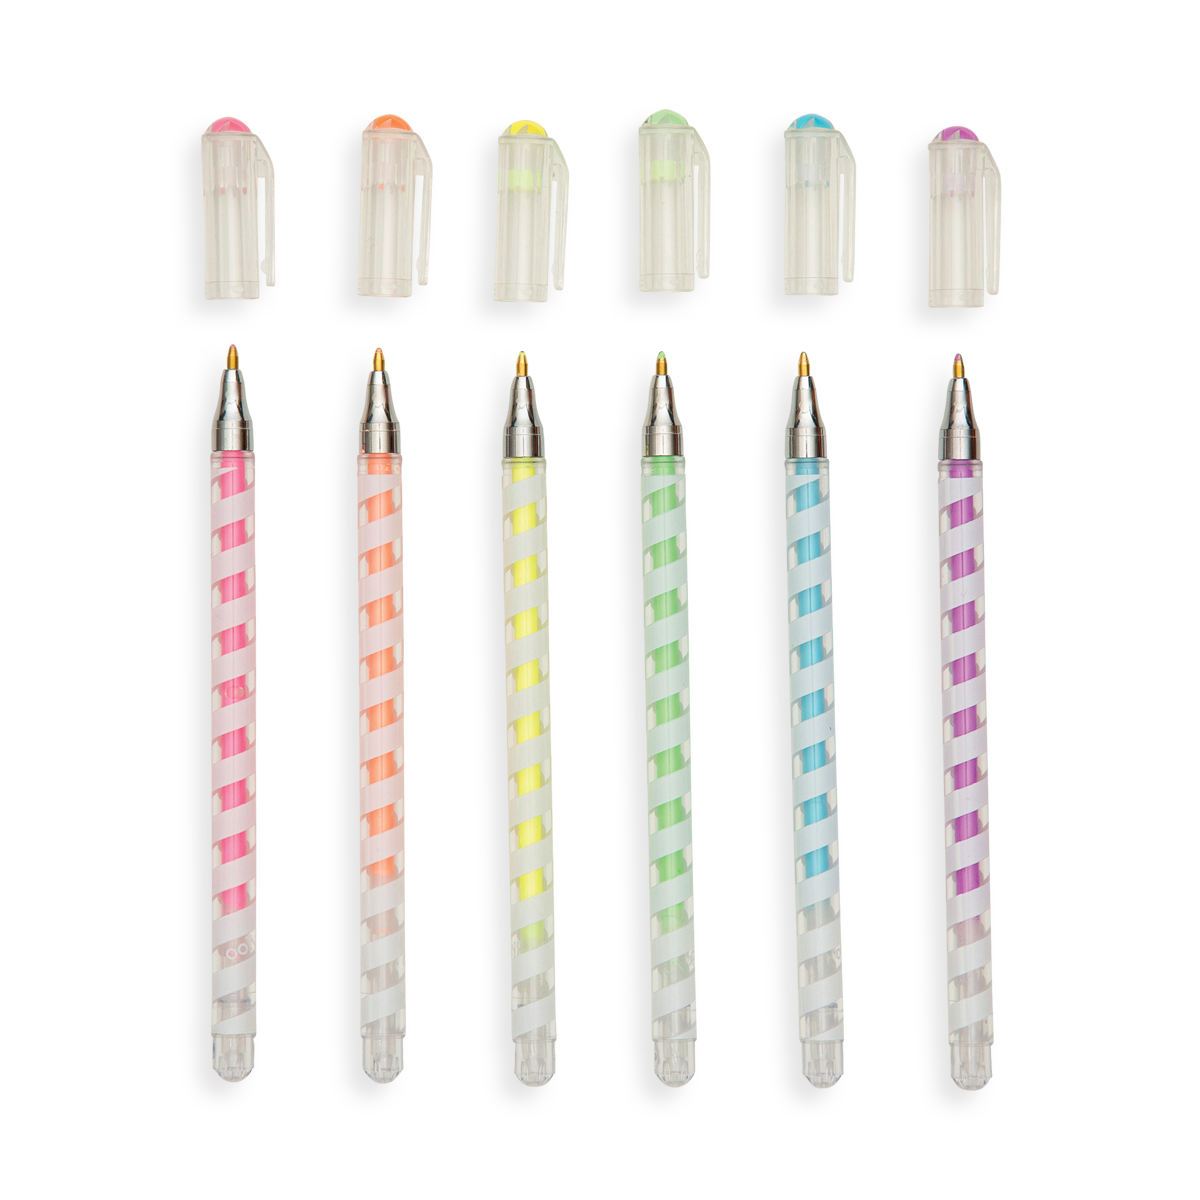 Totally Taffy Scented Gel Pens with their caps off